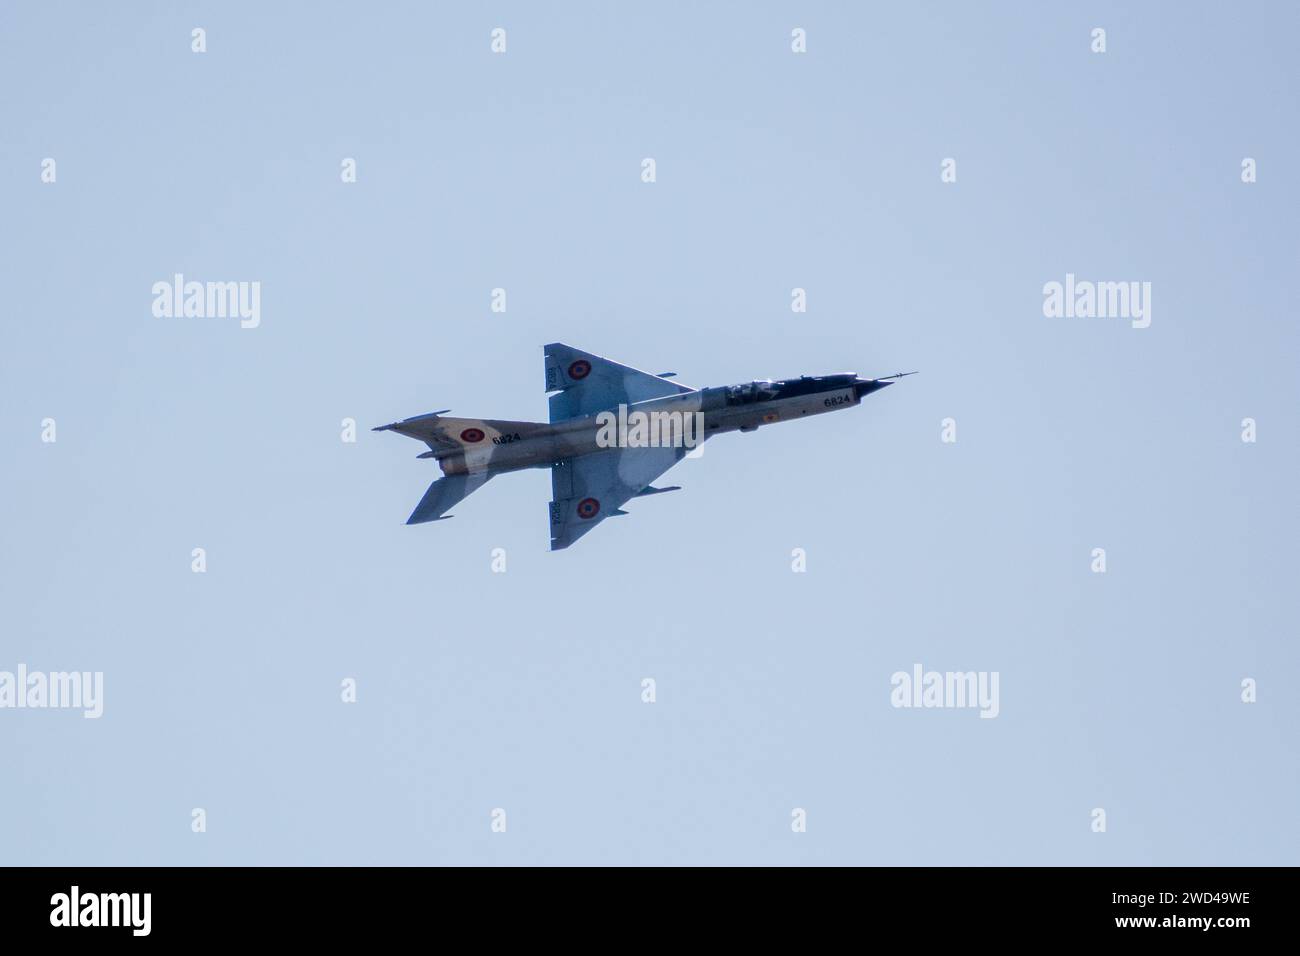 Mig 21 Romanian Air Force (RoAF) MiG-21MF-75 6824. Flying Mikoyan-Gurevich 21 Lancer flying fast. Romania retired this soviet era fighter jet in 2023. Stock Photo